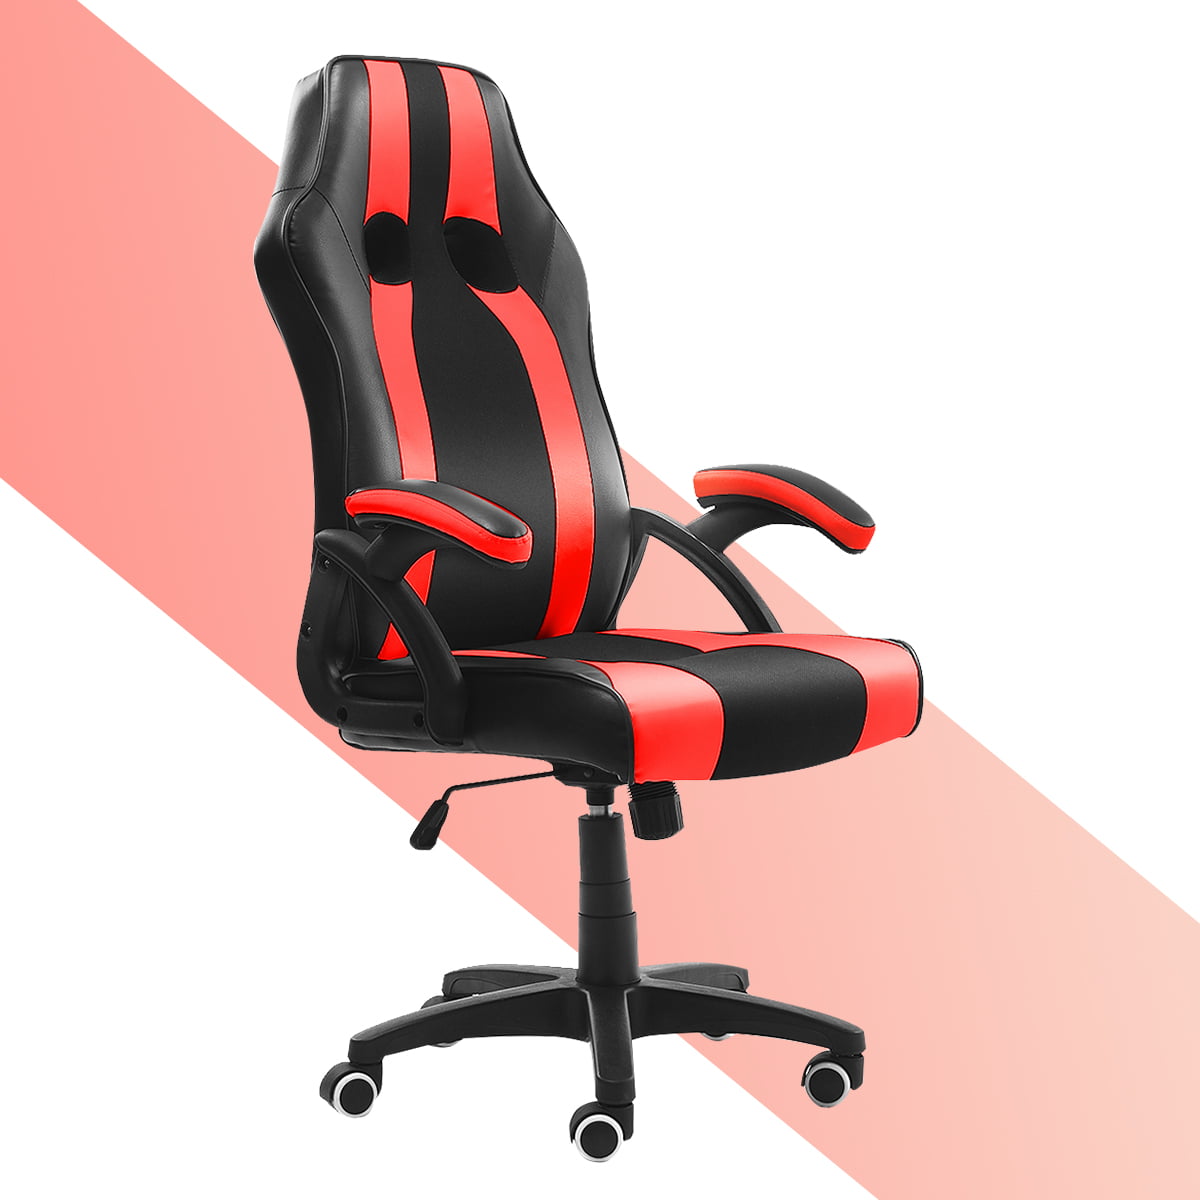 Details about   Gaming Chair Racing Reclining Ergonomic PU Leather Office Chair Race Car Style 